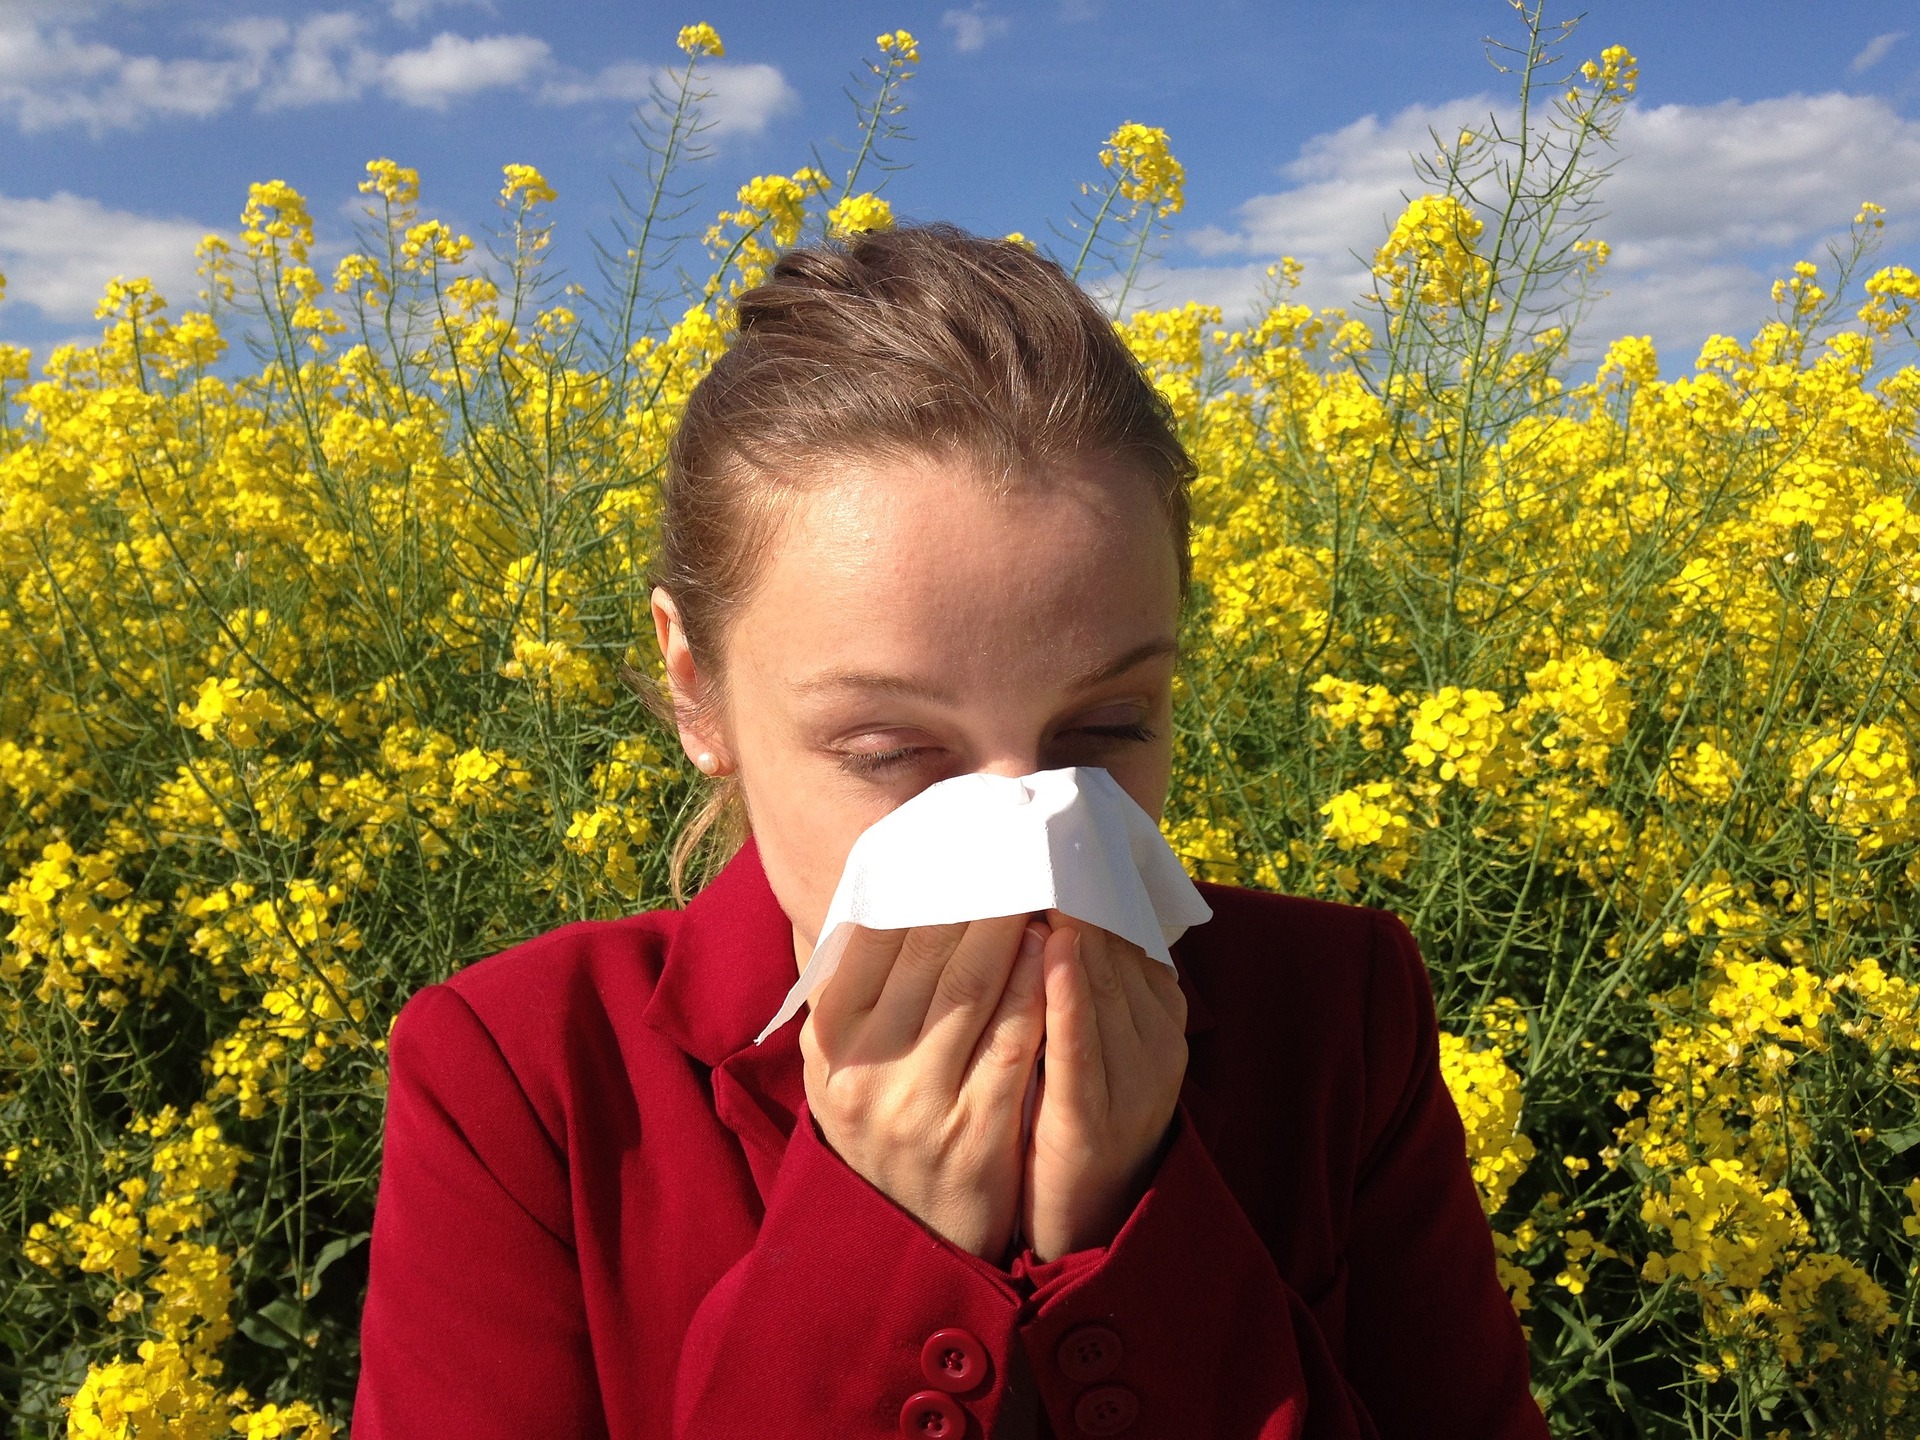 A woman in a red blouse covering their nose and mouth with a white tissue in their hand. They have their eyes closed. They are surrounded by a field of yellow flowers and there is a blue sky with white clouds above them.